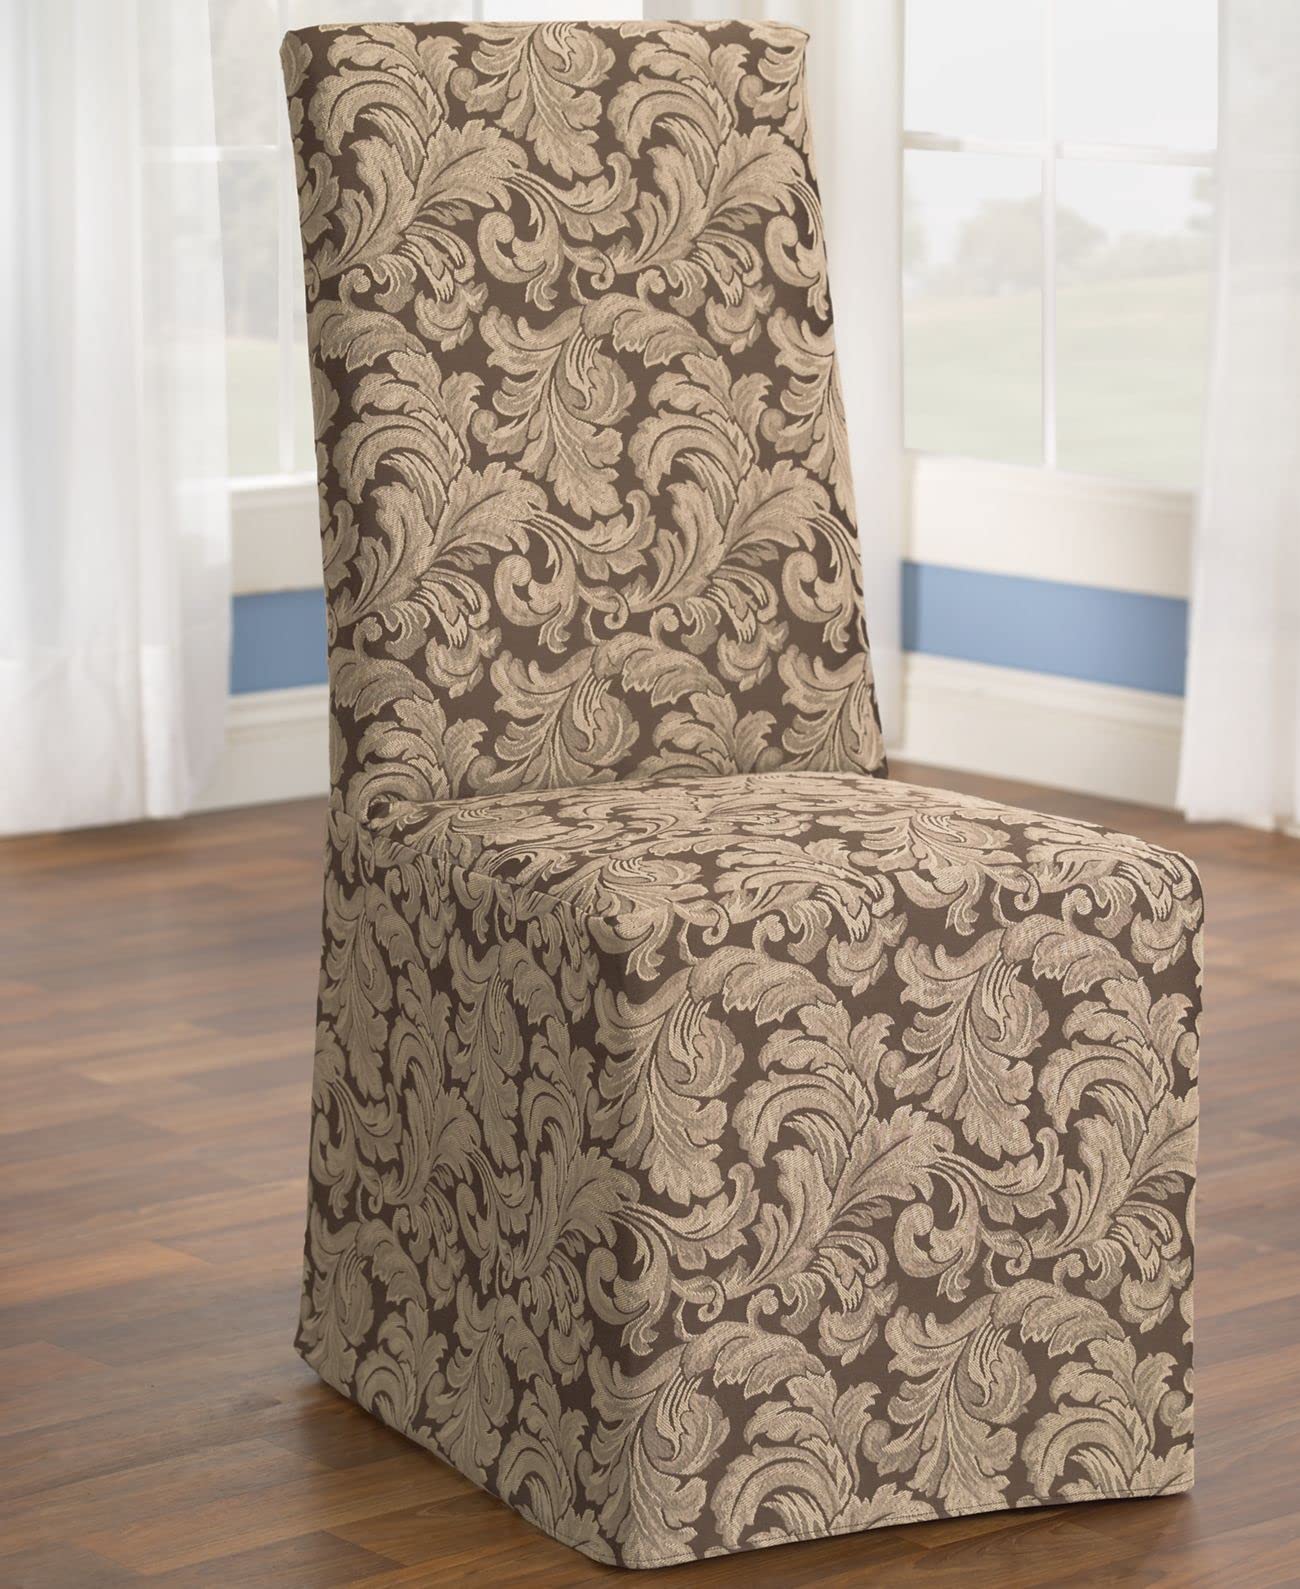 Sure Fit Scroll Long Dining Room Chair Slipcover - image 2 of 3